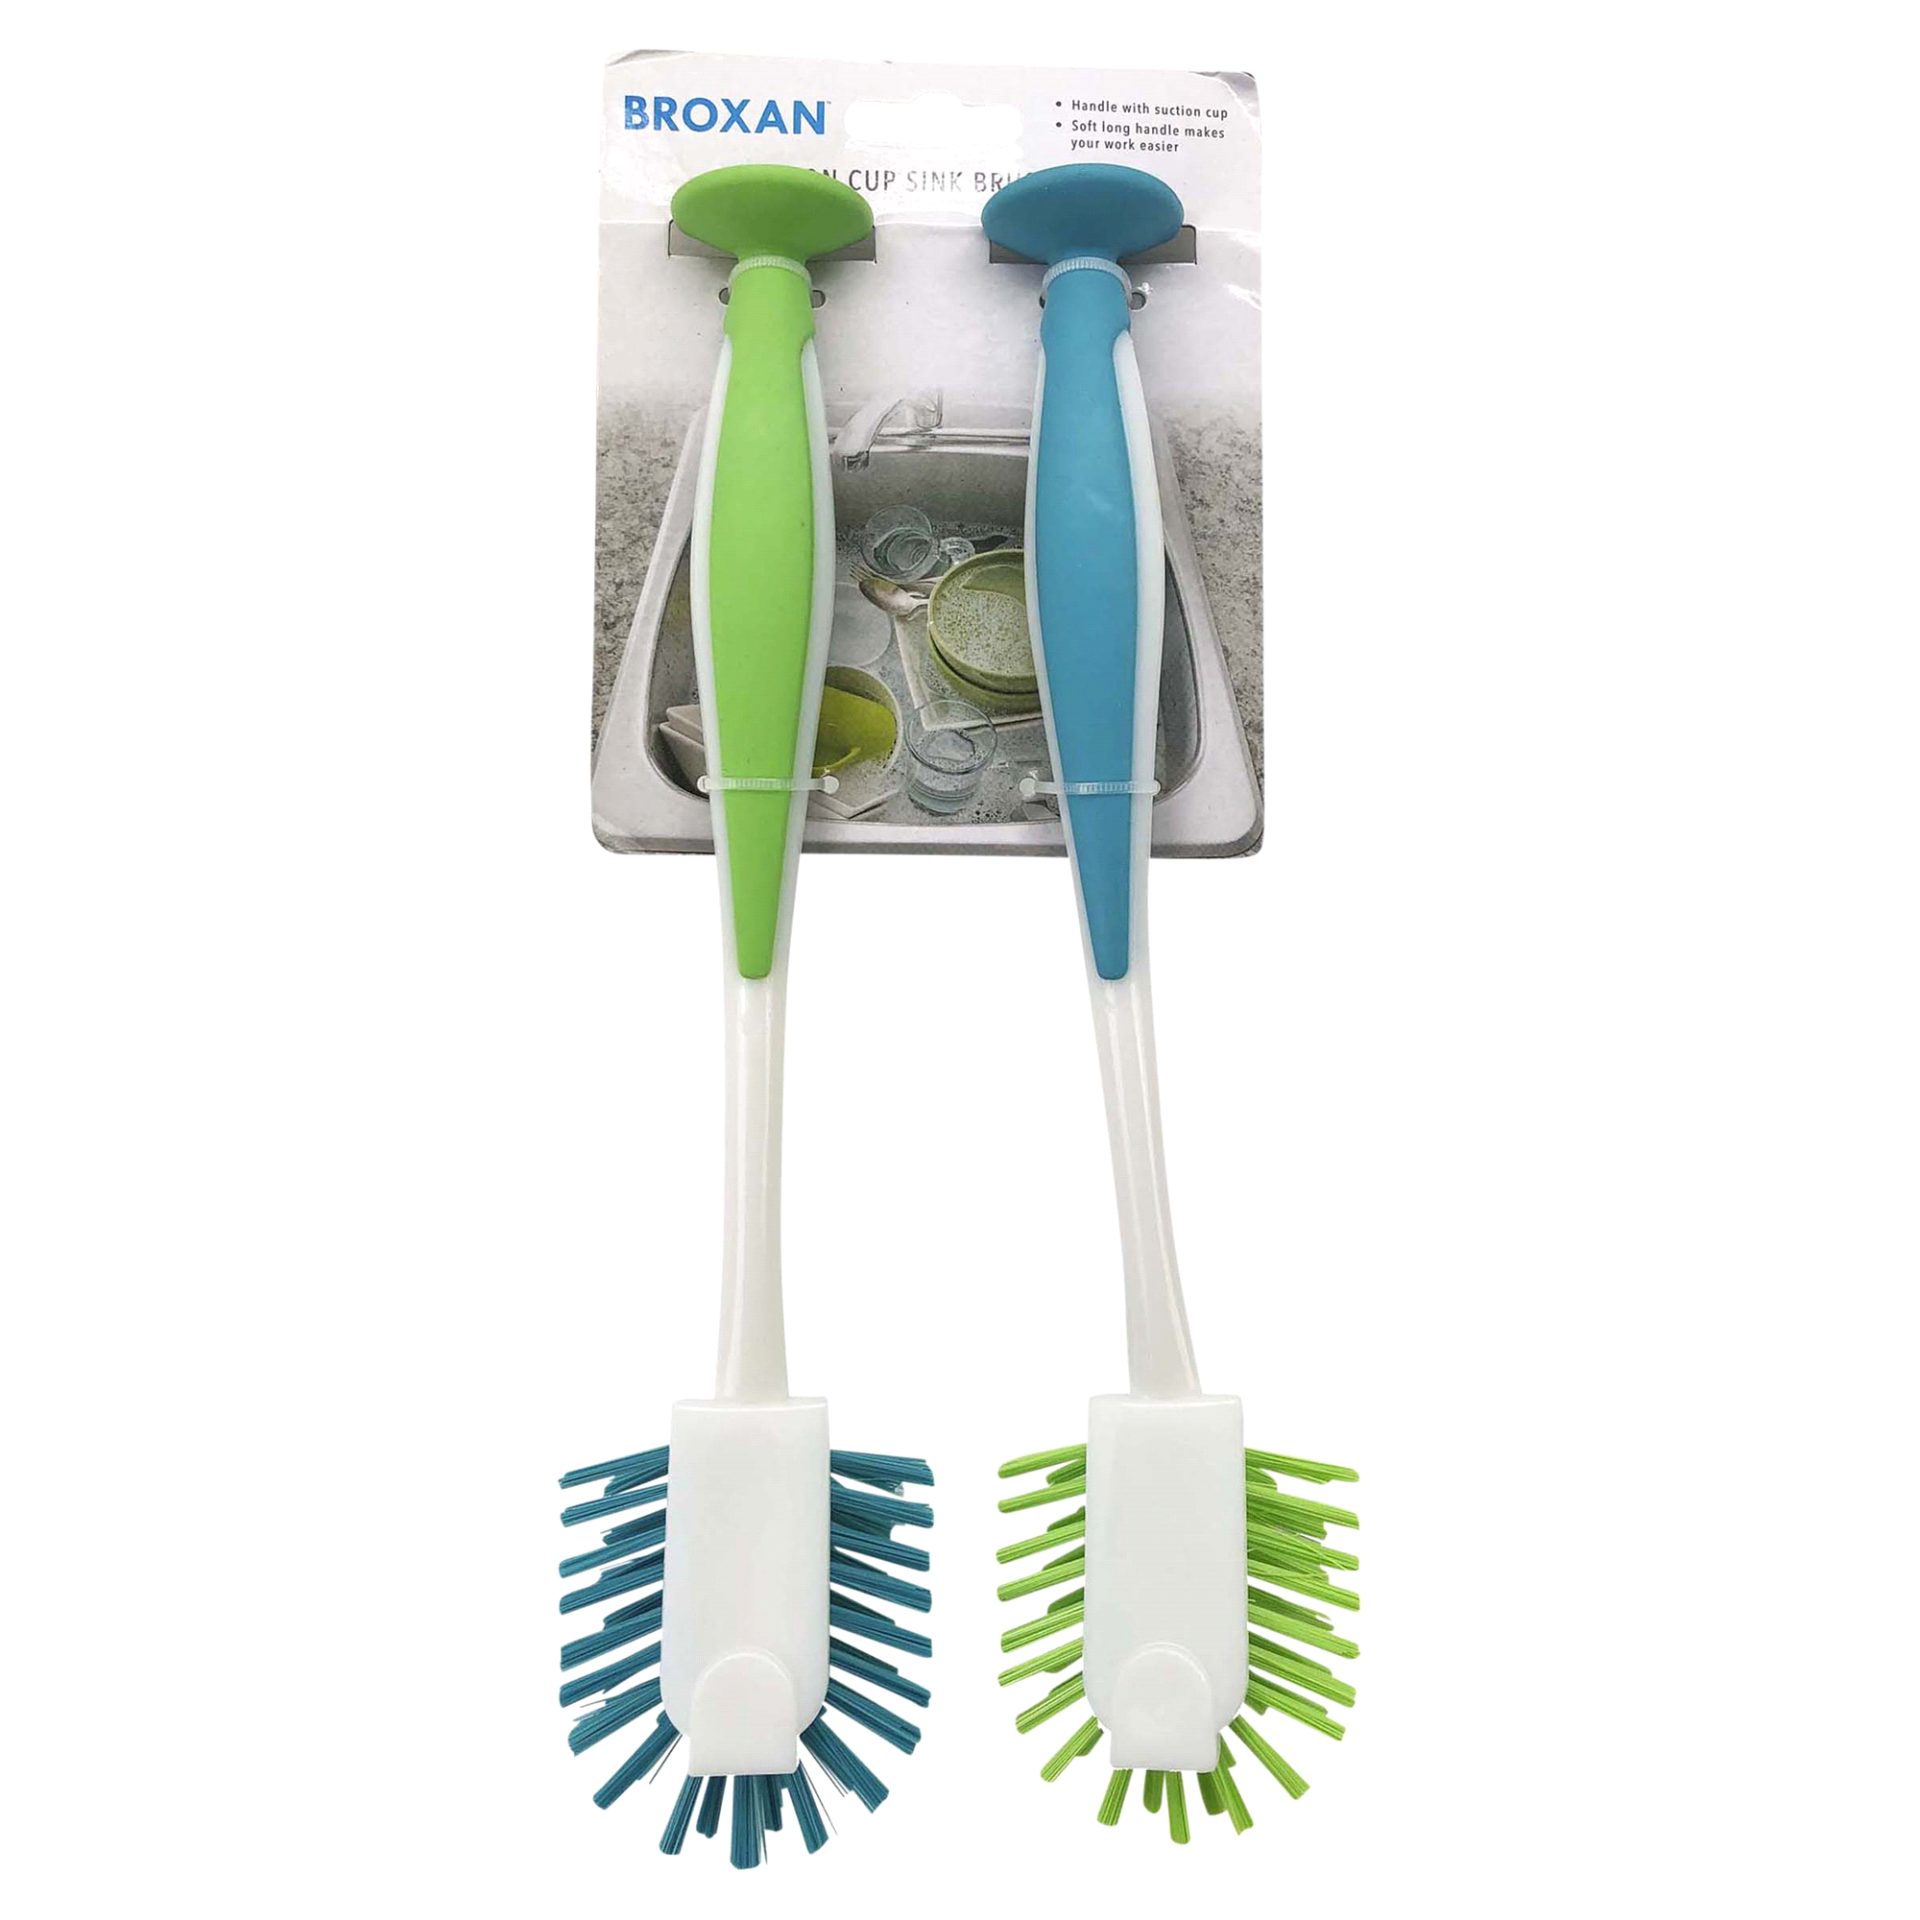 slide 1 of 1, Broxan Suction Cup Sink Brush, 2 ct